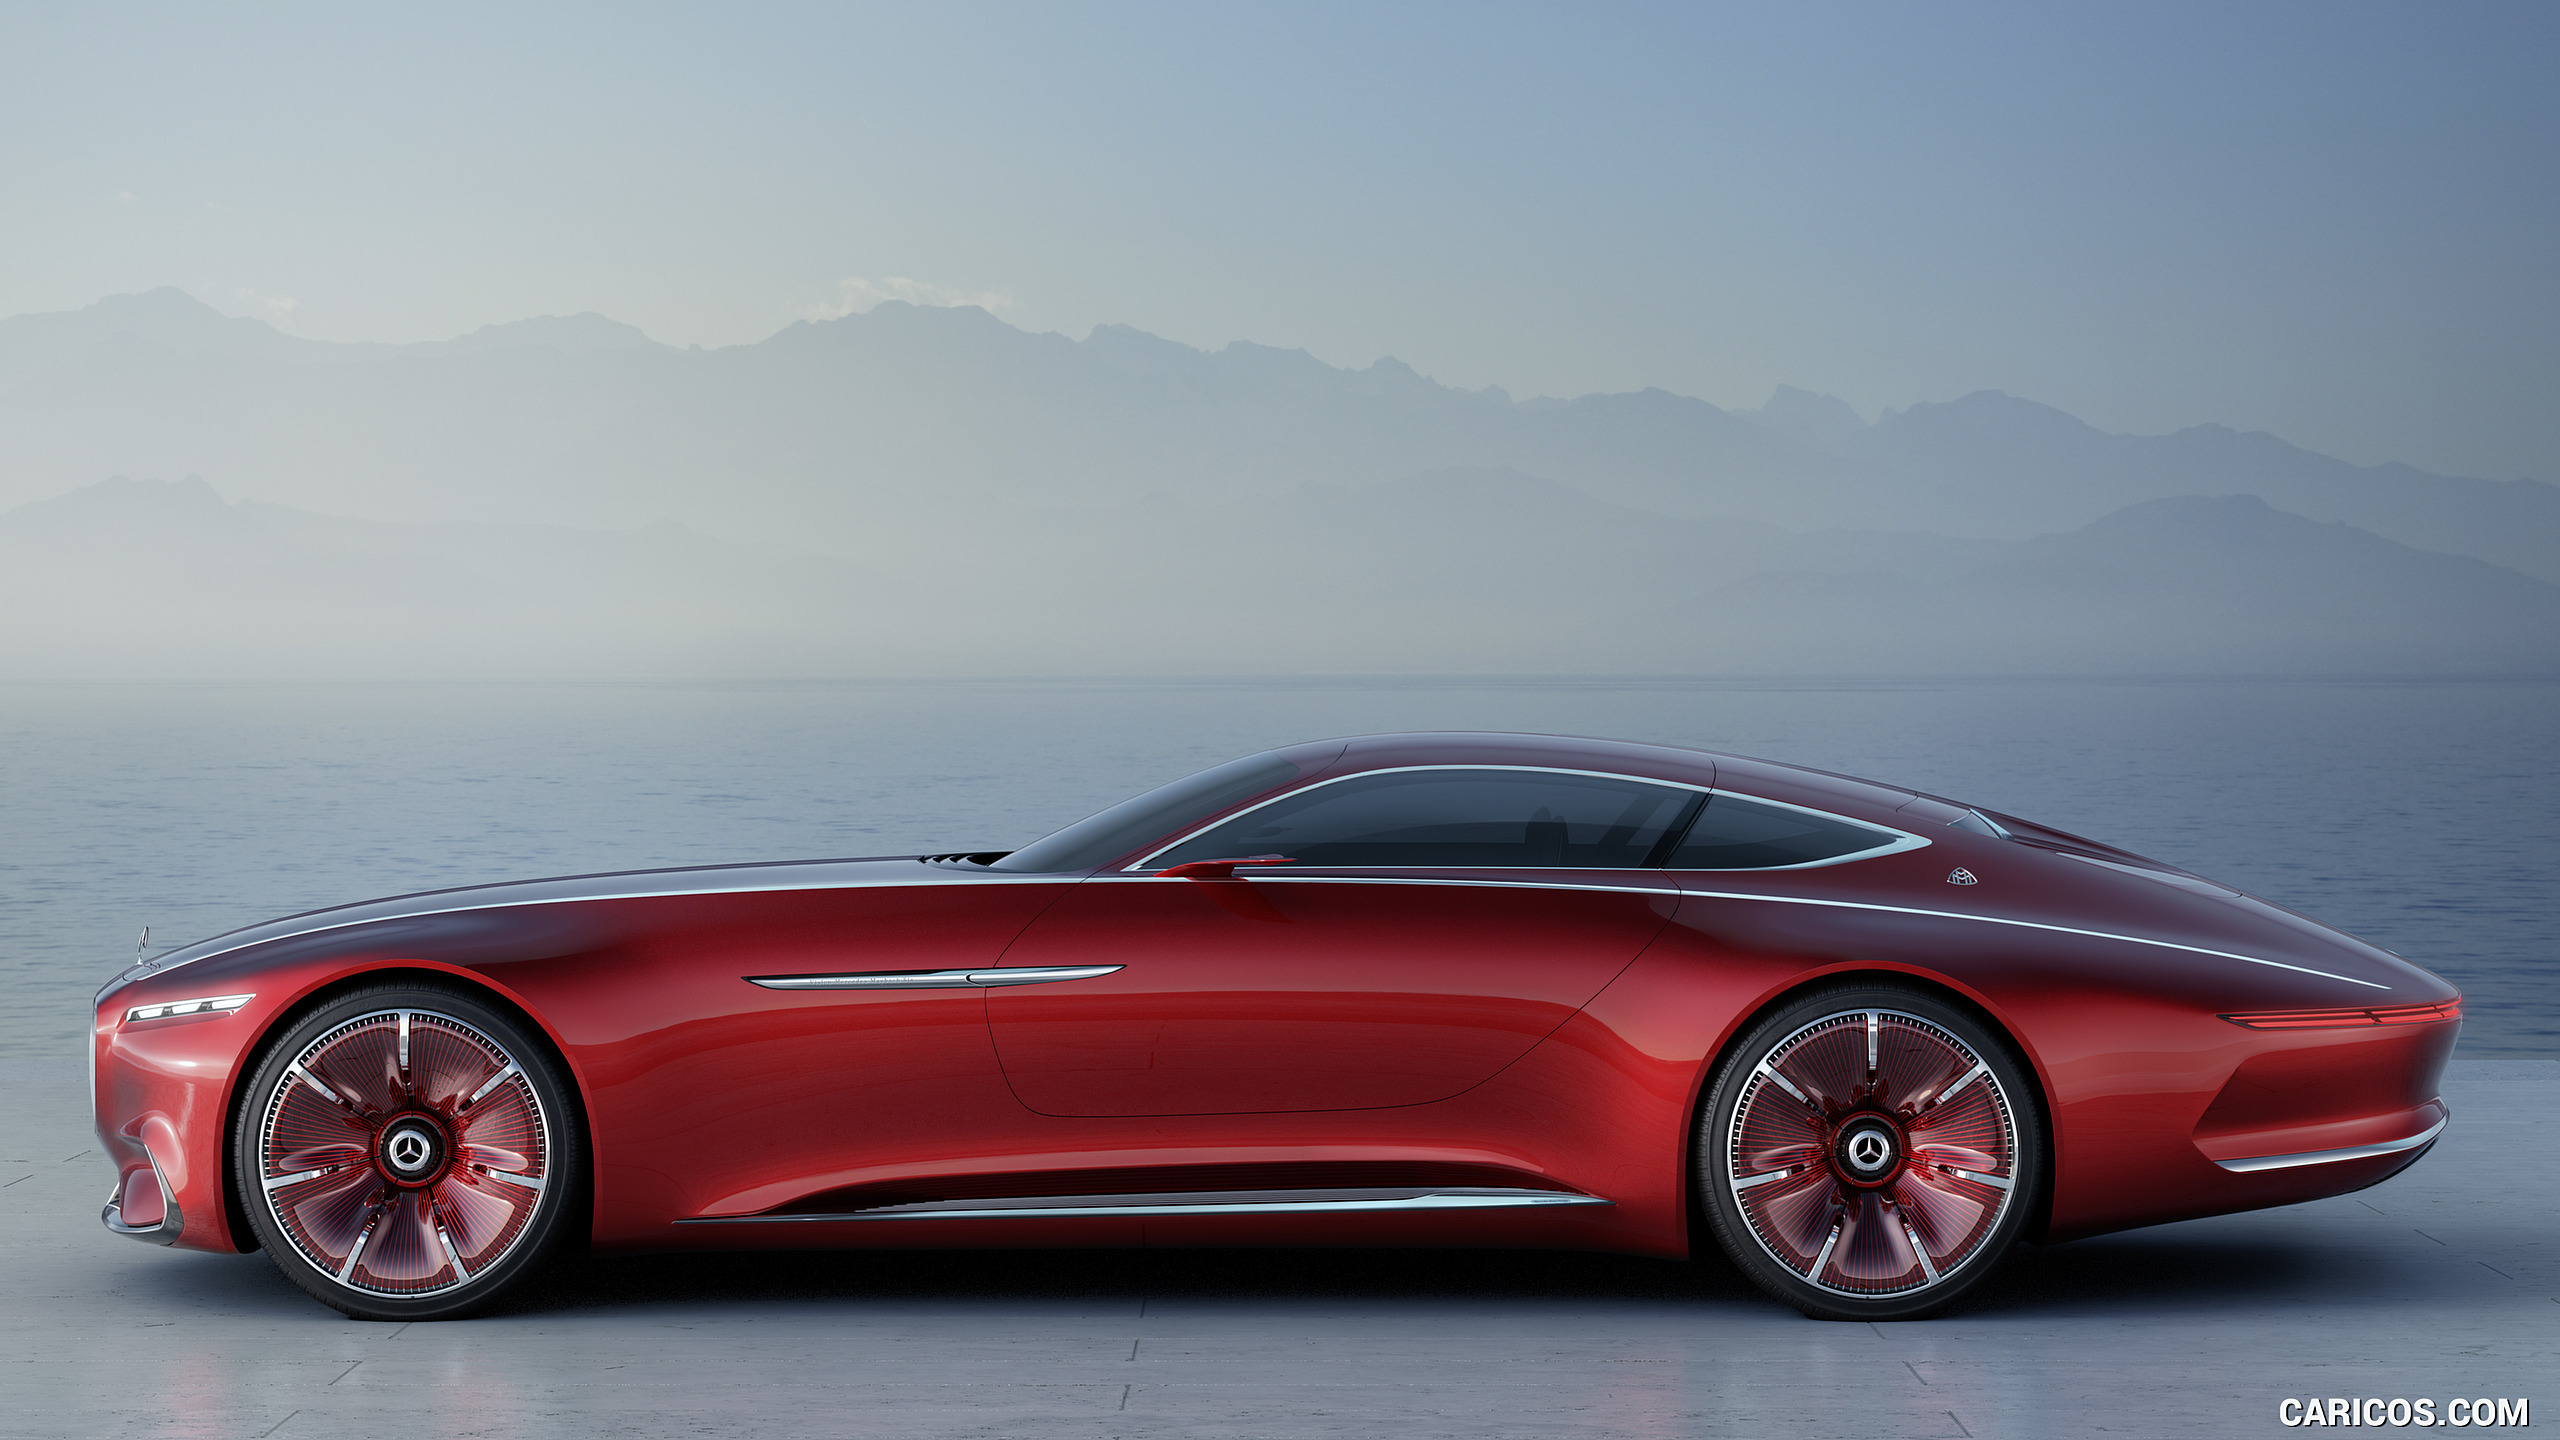 2016 Mercedes-Maybach 6 Concept - Side, #3 of 31